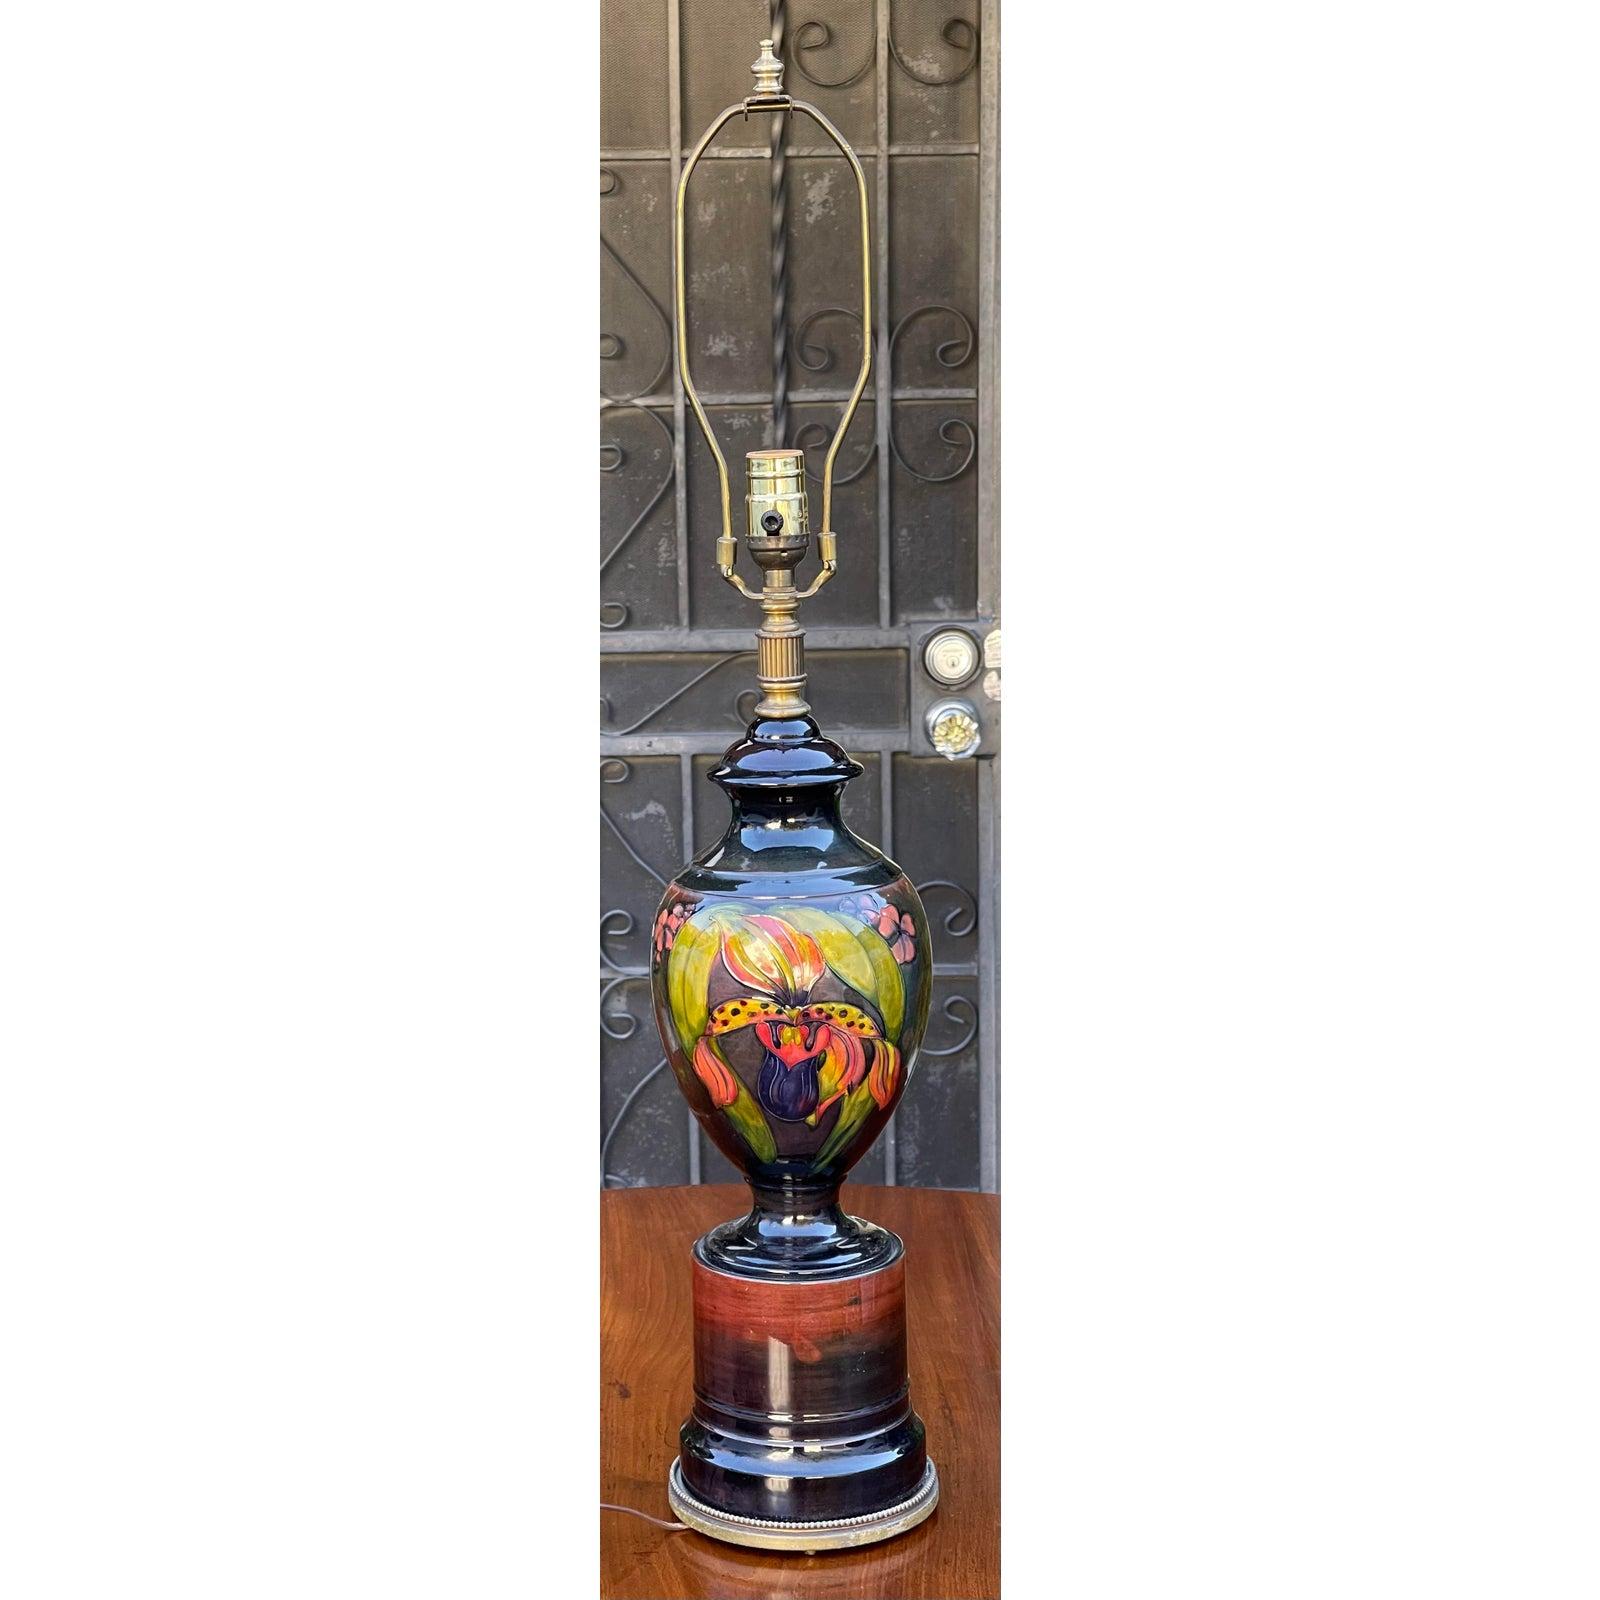 Antique Art Deco Moorcroft Pottery table lamp

The base only measures 18.5